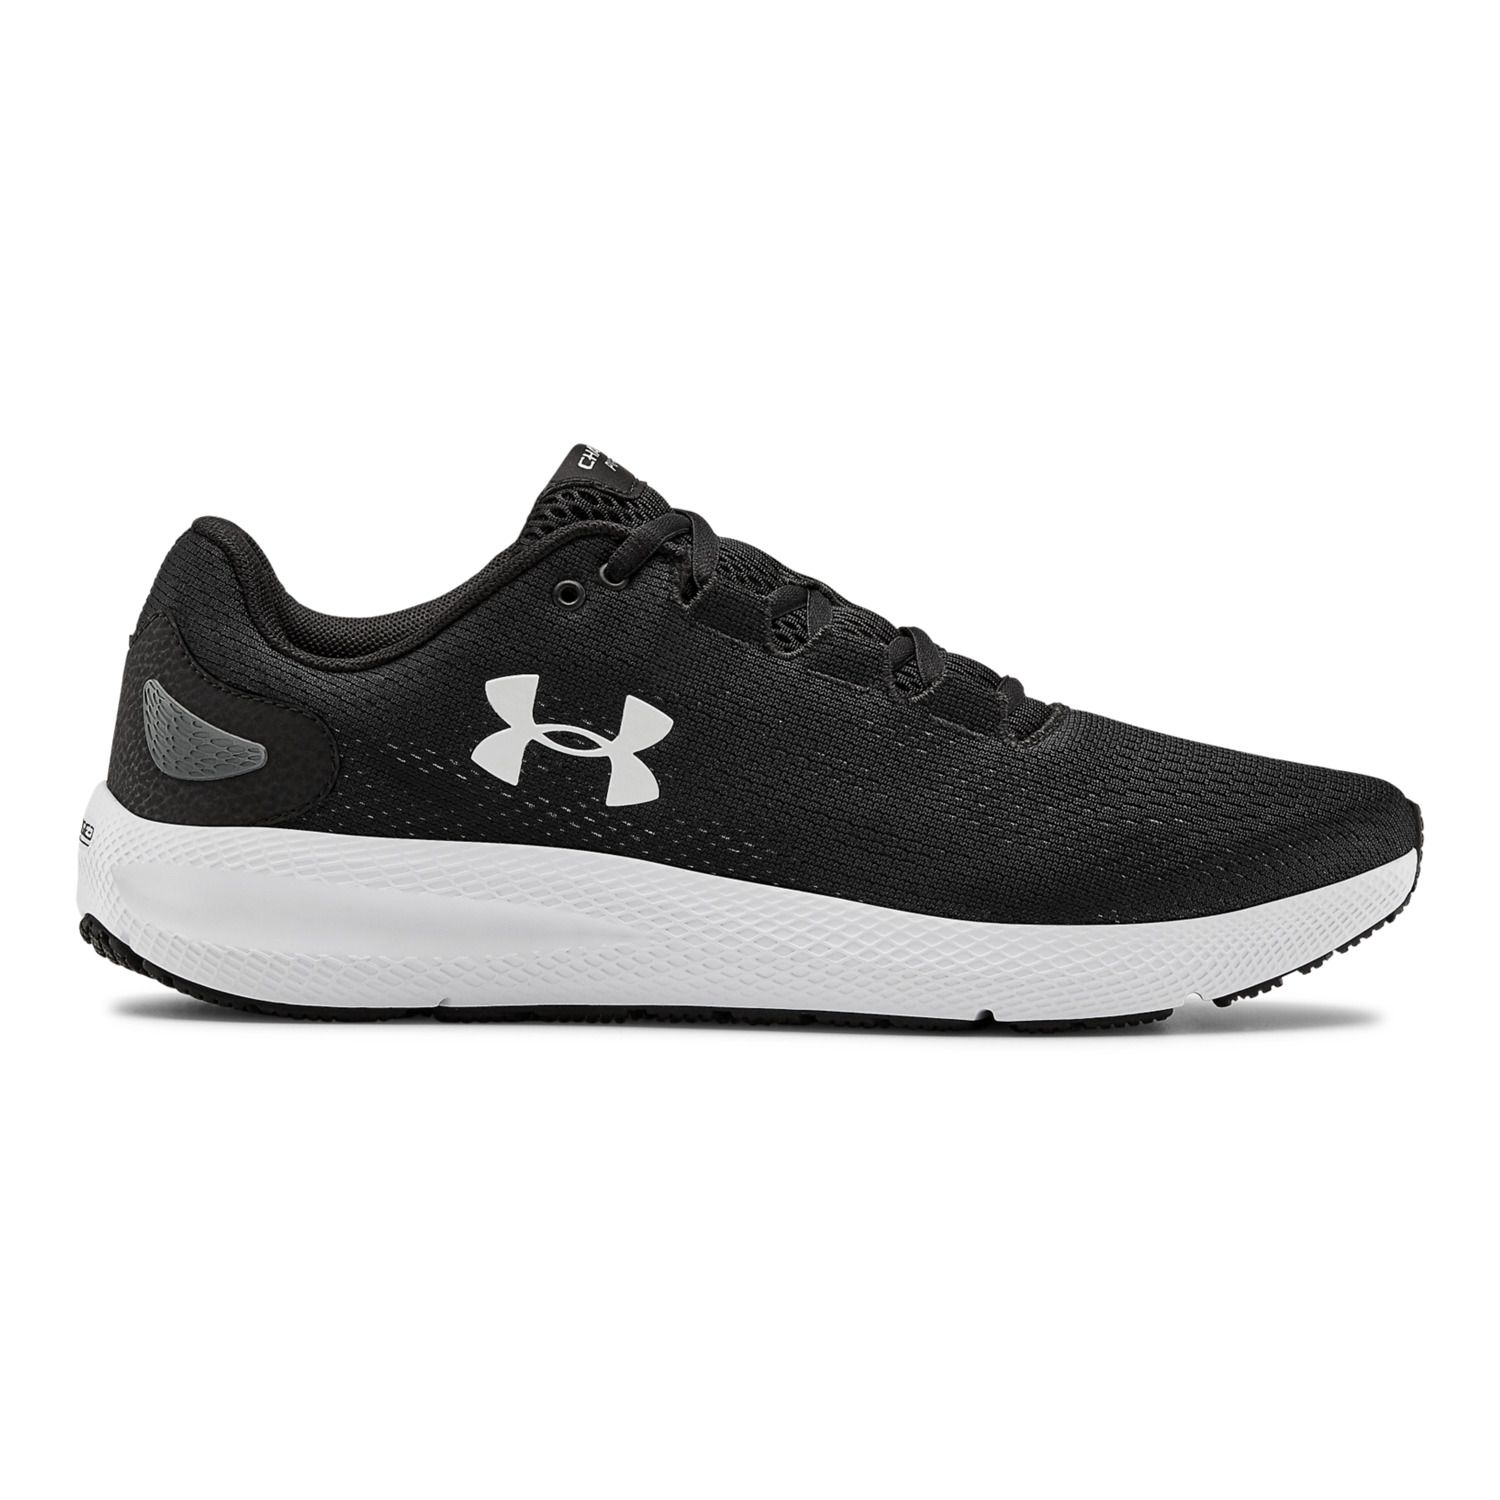 under armour casual shoes